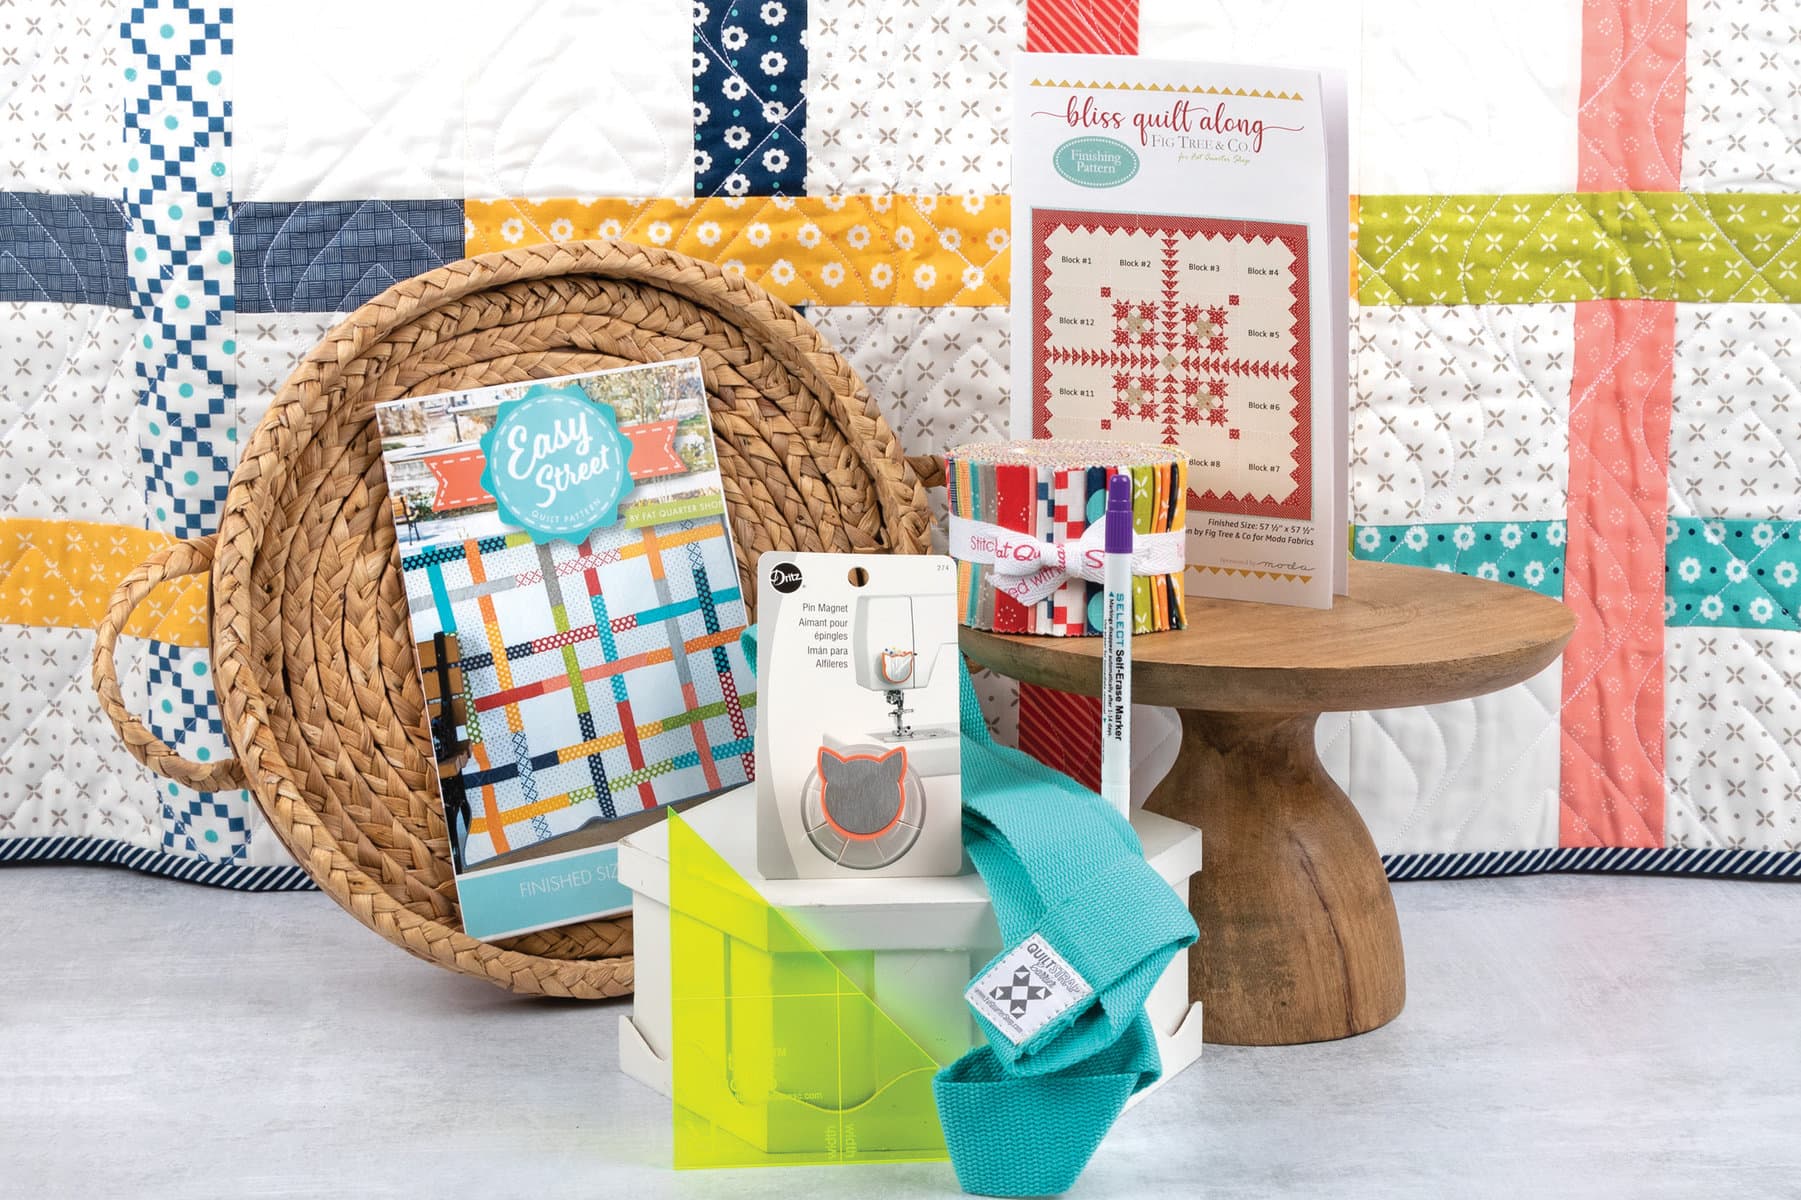 All the delights inside the March Sew Sampler box will take your